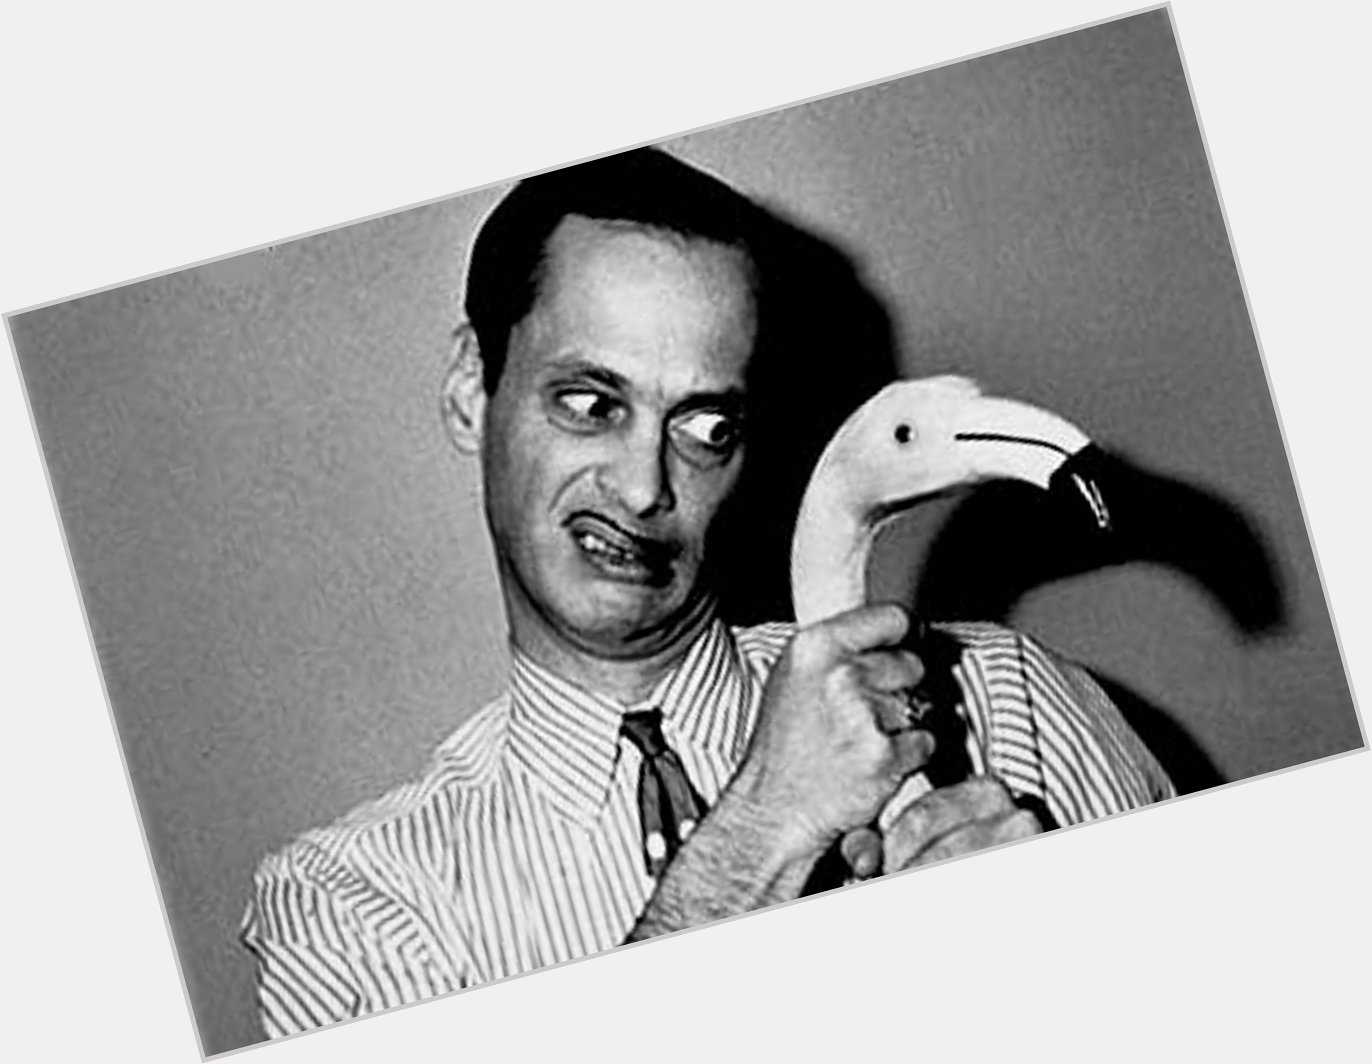 Happy birthday to the Pope of Trash himself, the idiosyncratic and iconic John Waters! 